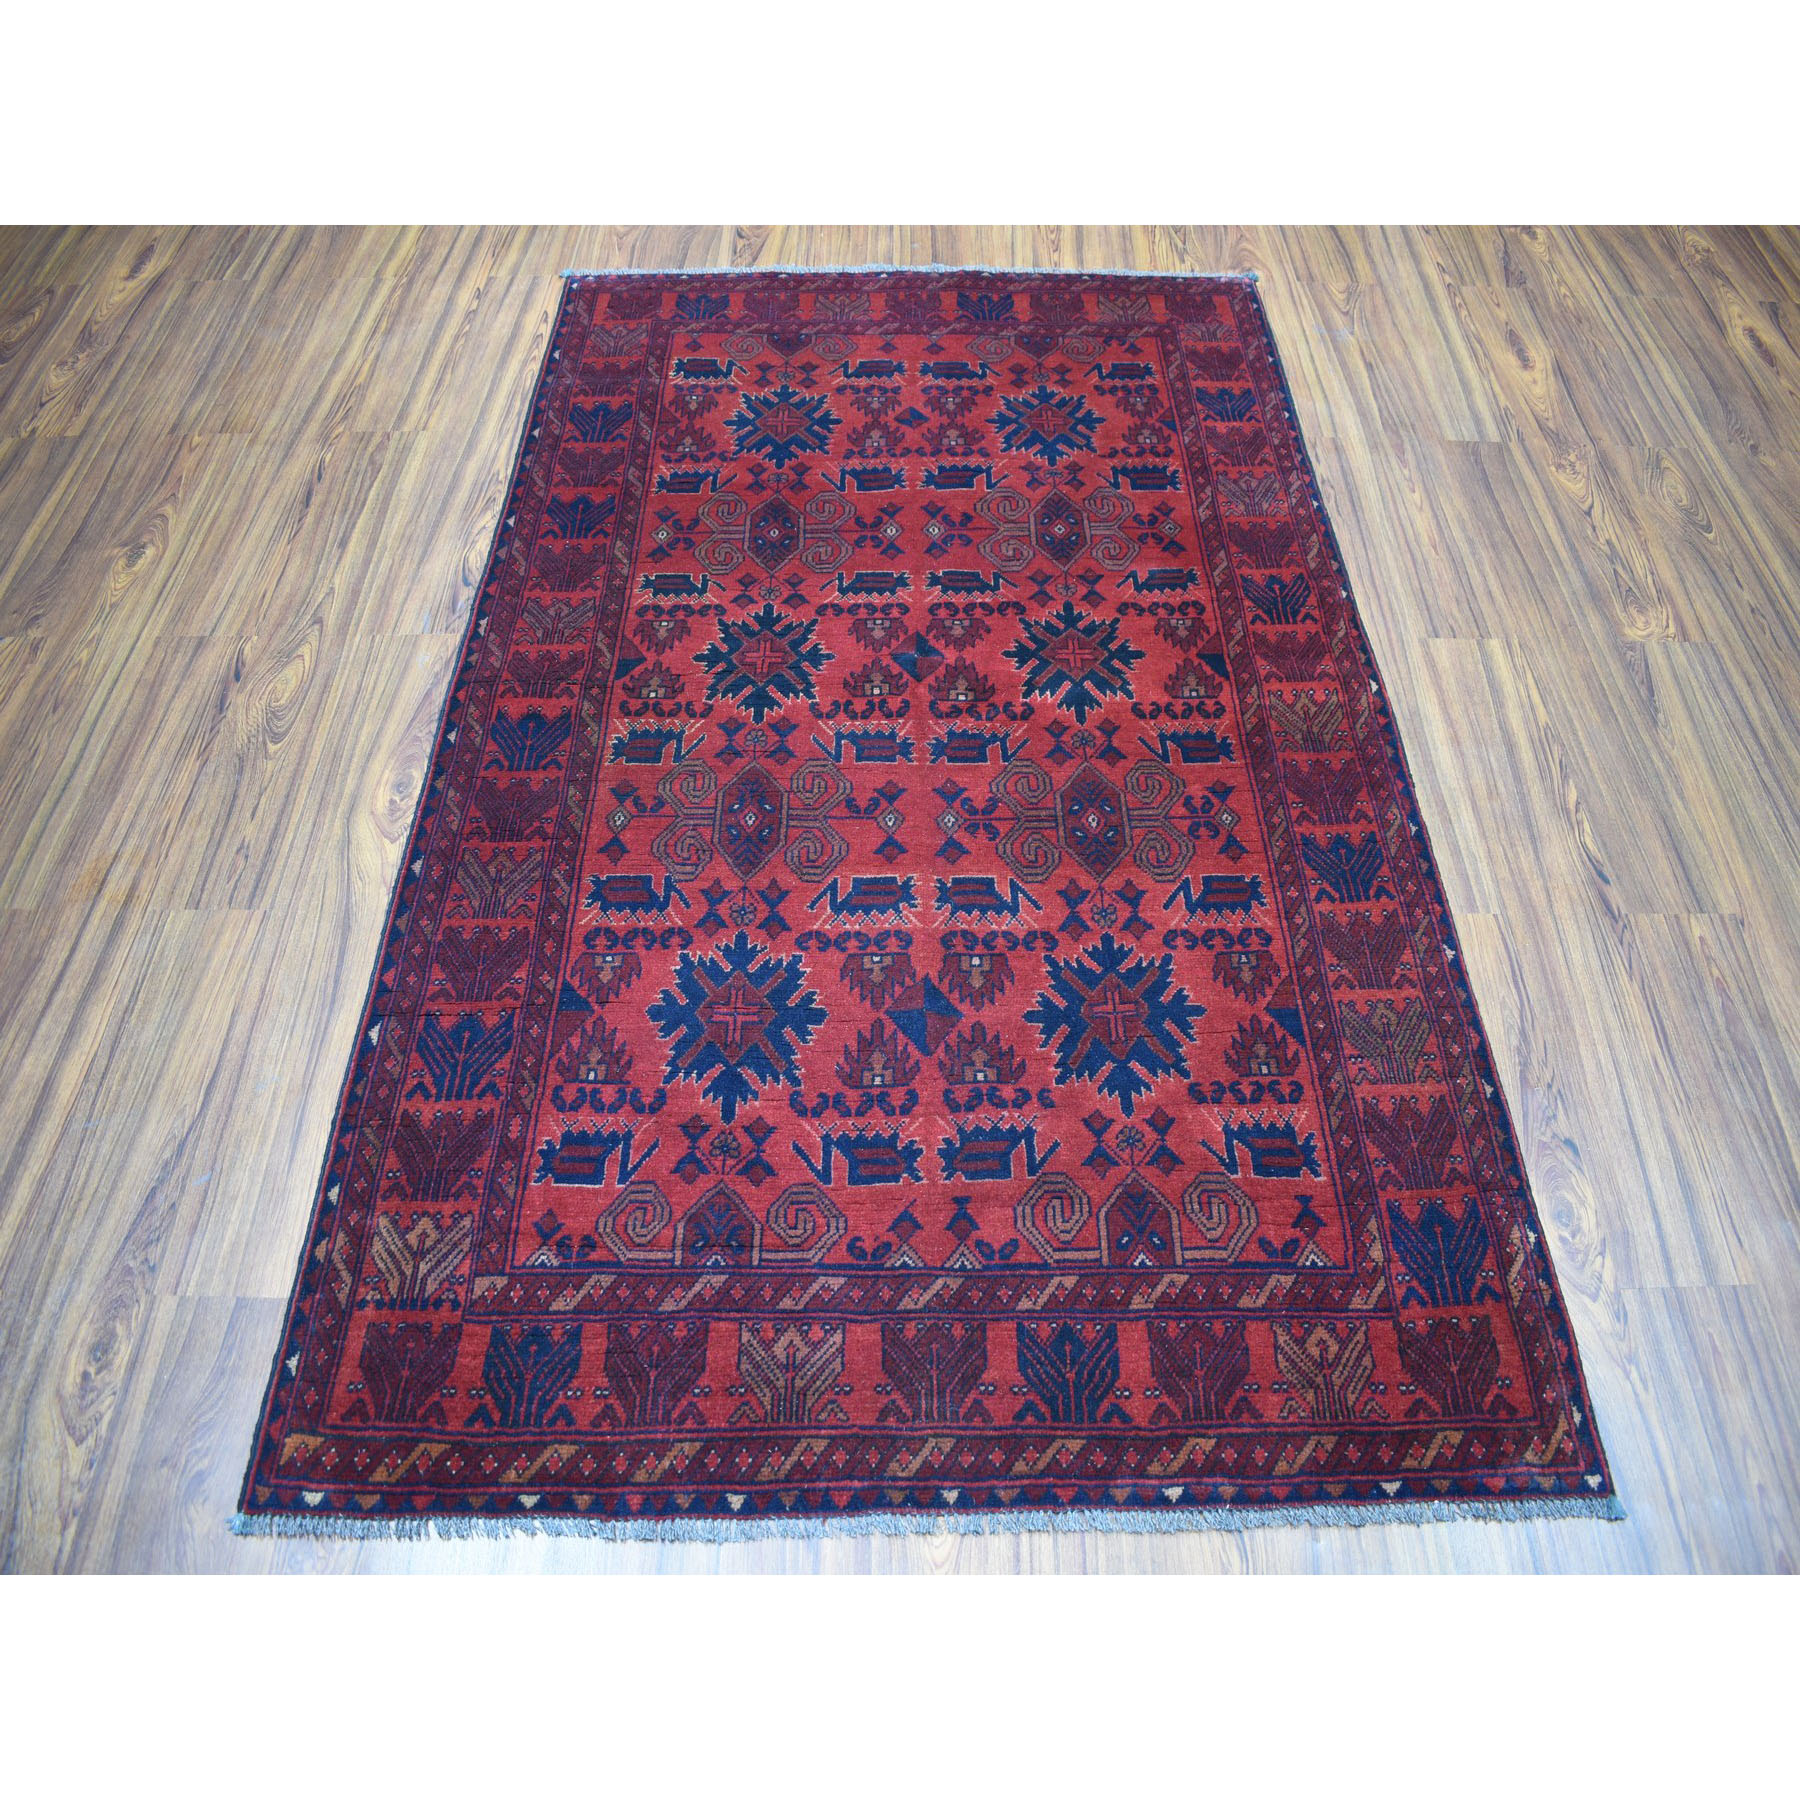 4-2 x6-7  Vintage Look Red Geometric Design Afghan Andkhoy Pure Wool Hand-Knotted Oriental Rug 